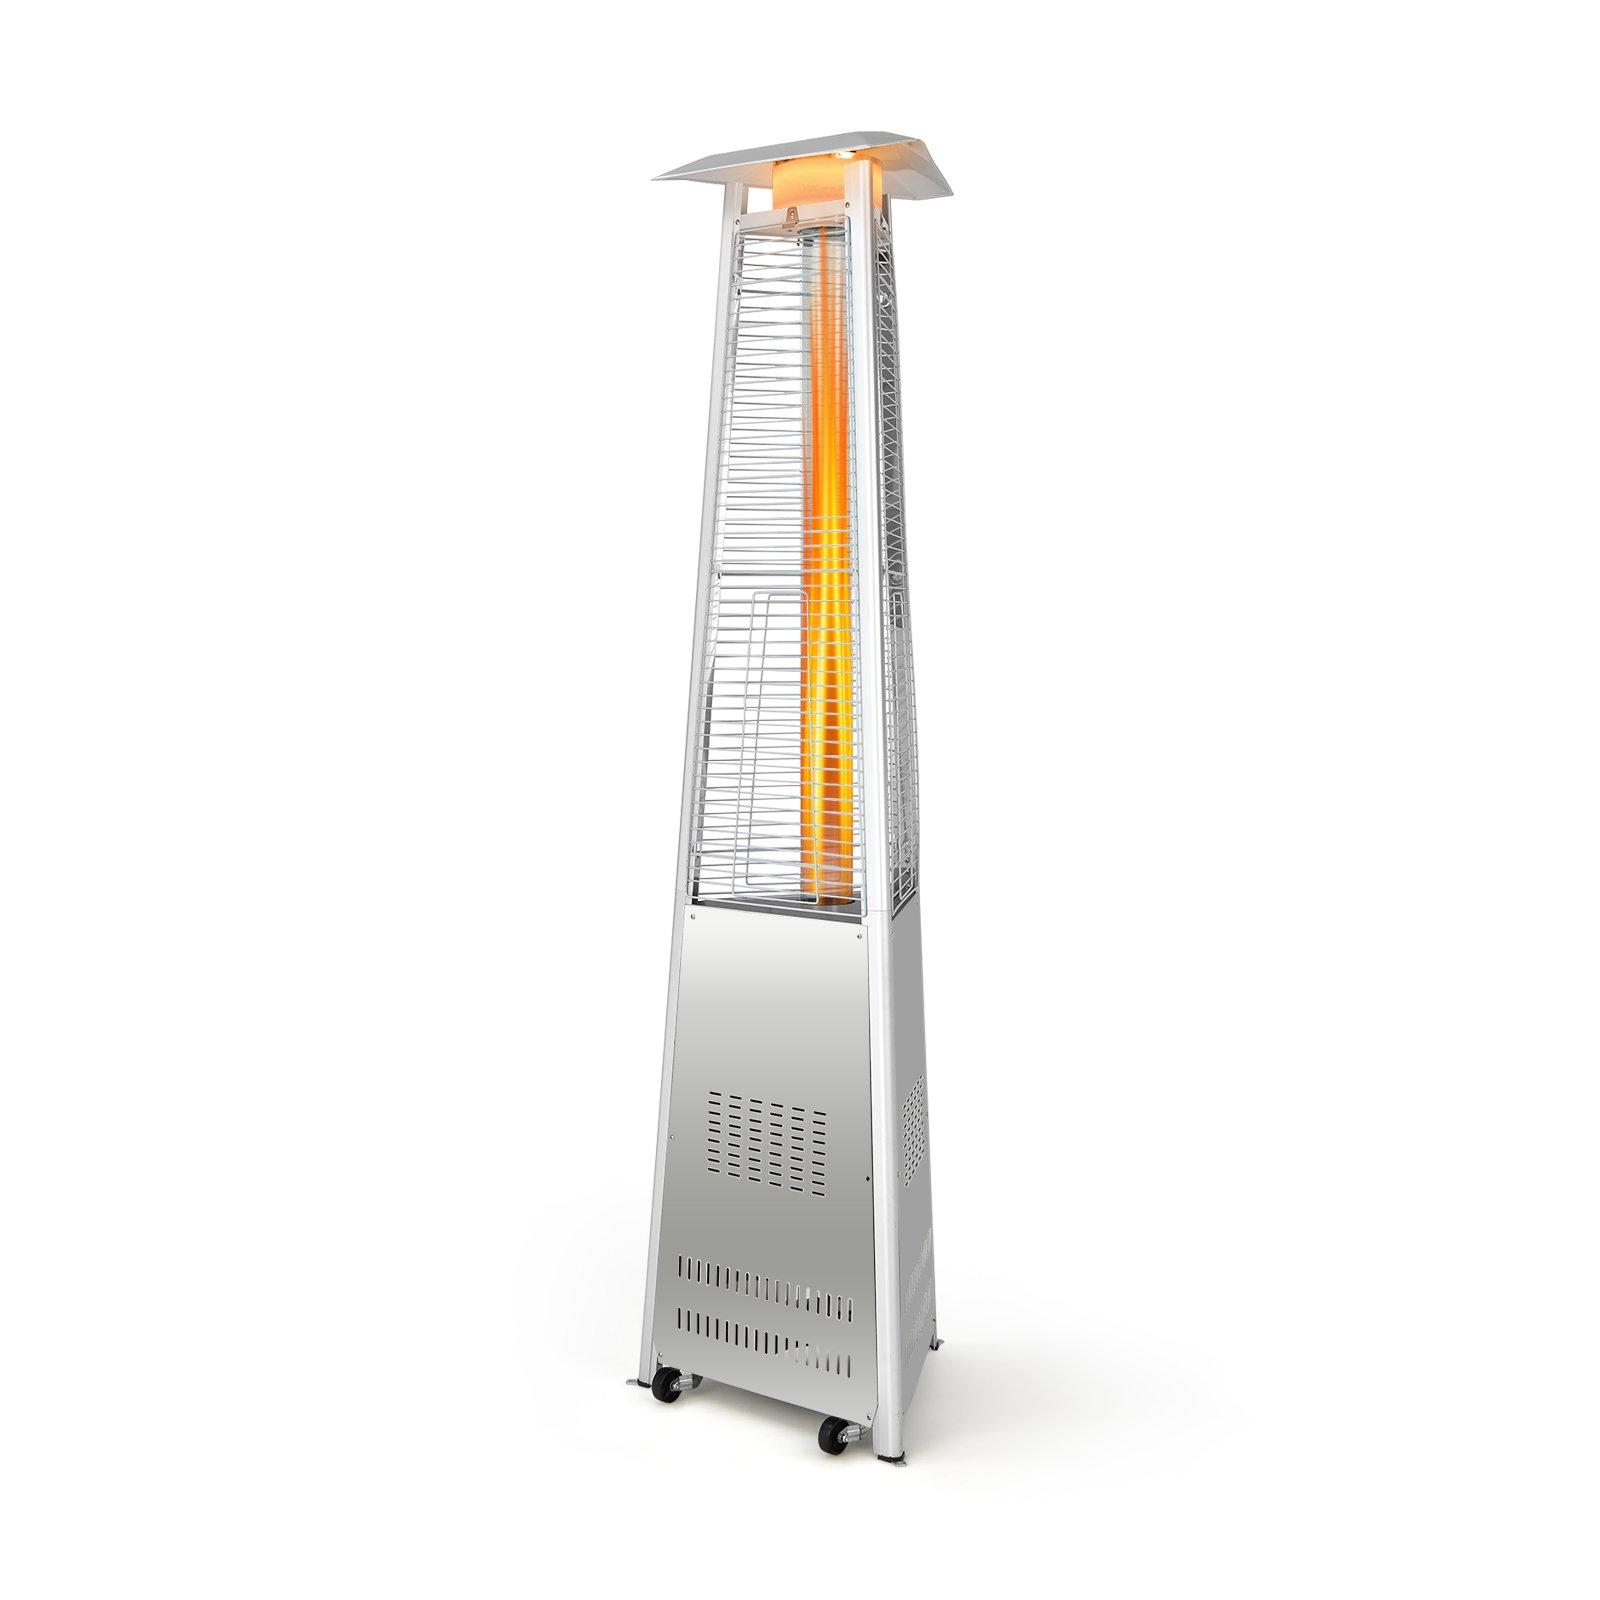 42,000 BTU Pyramid Patio Heater Stainless Steel Outdoor Patio Heater W/ Flameout Protection